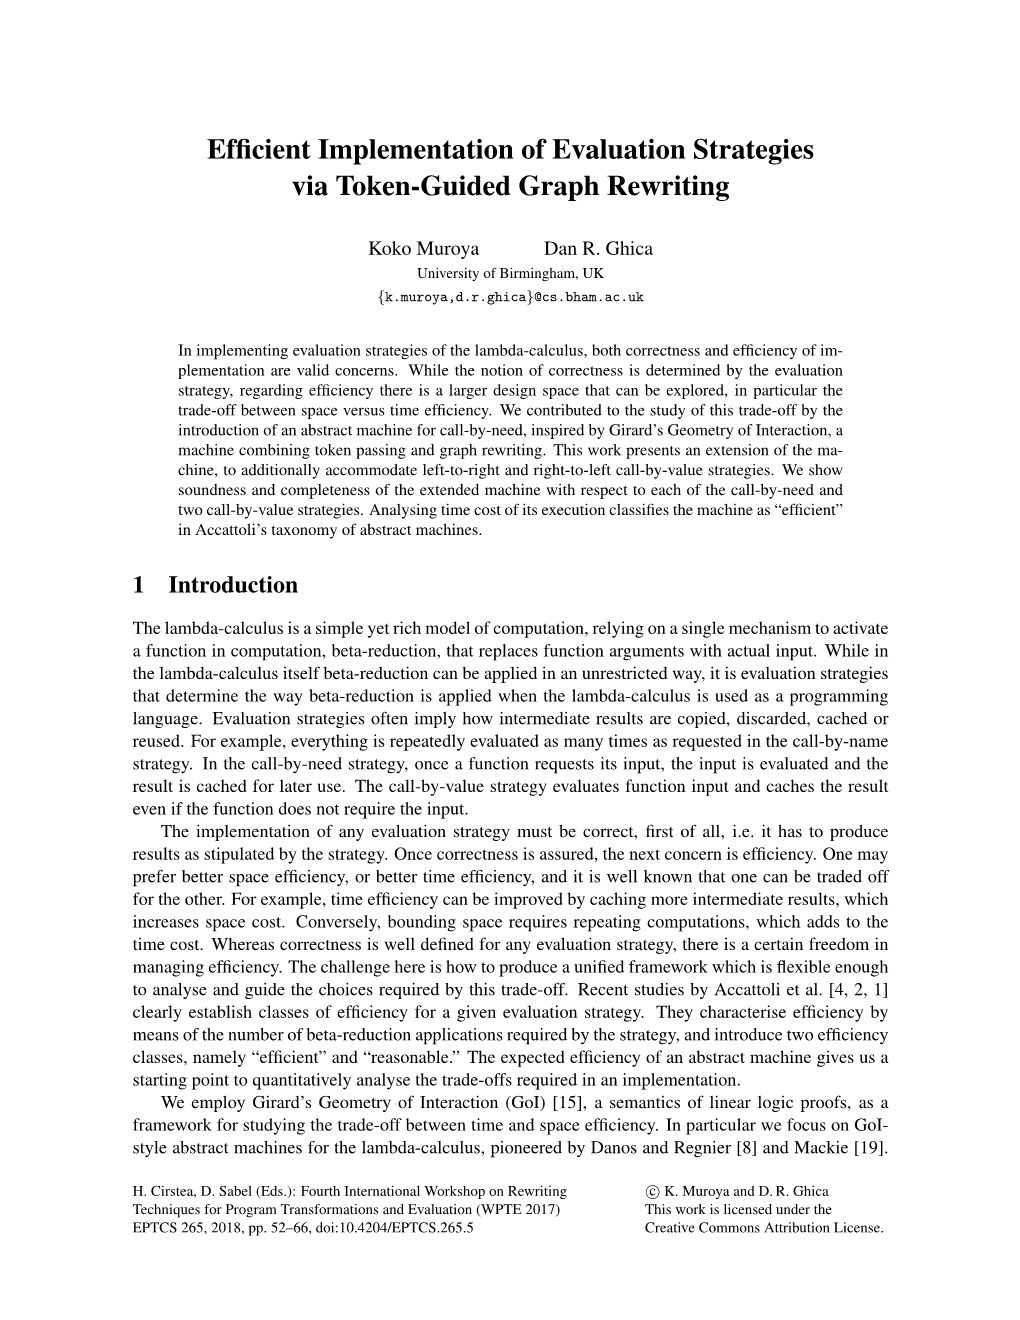 Efficient Implementation of Evaluation Strategies Via Token-Guided Graph